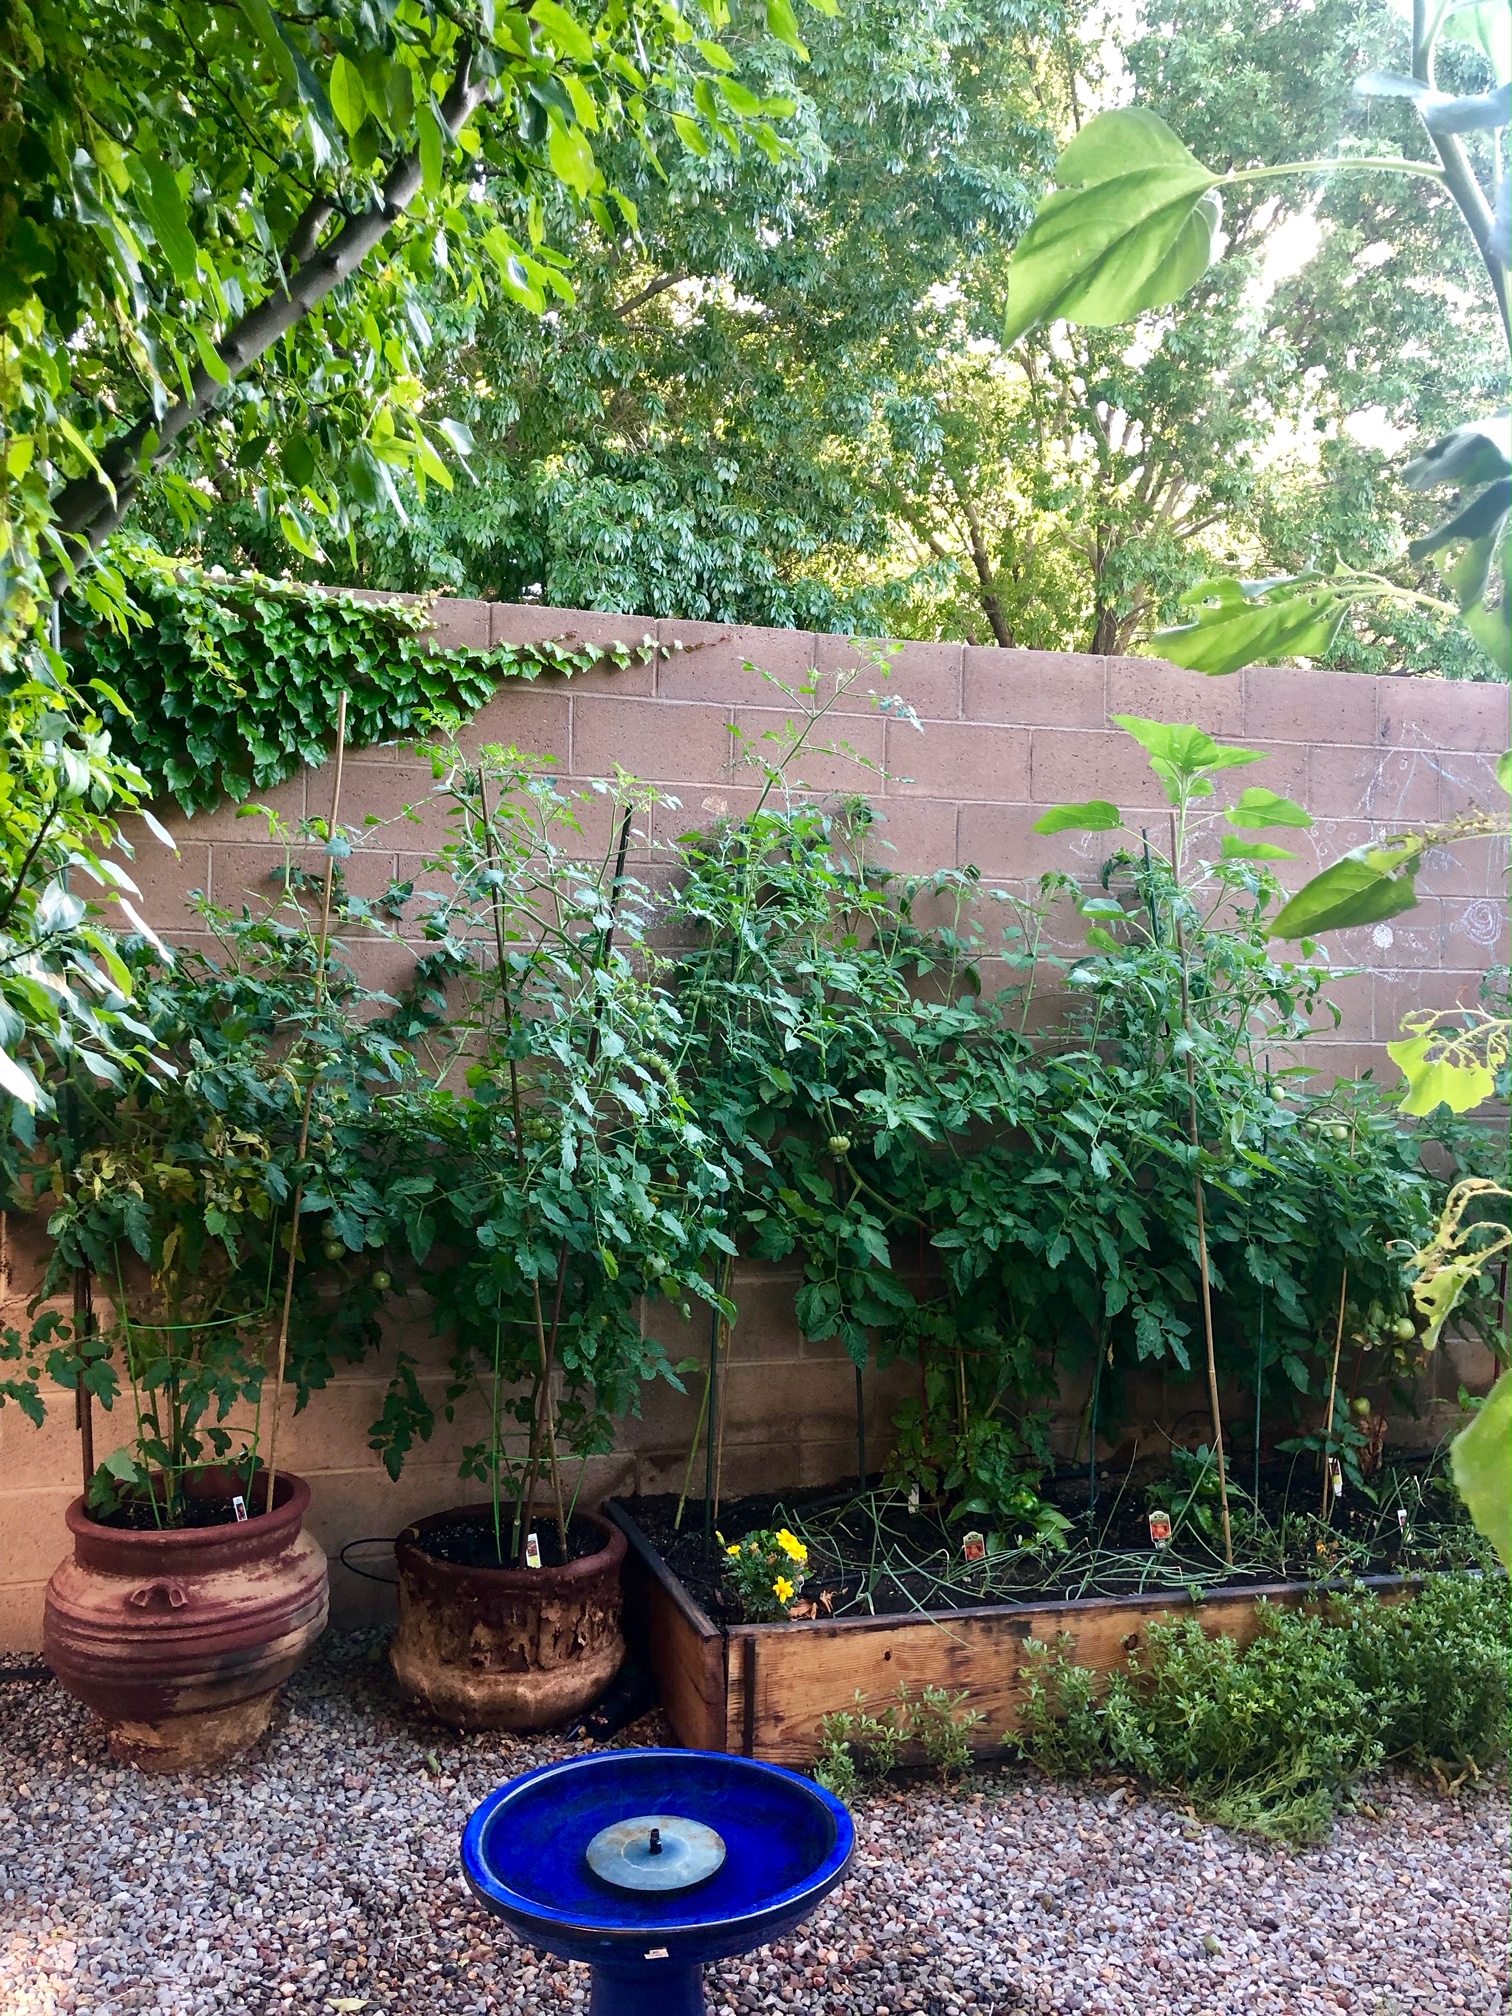 (4/4) She just had a bad wind storm, so the plants are knocked down a bit, but I wanted you to see what is happening here! NOTE, The back wall is 11’ tall." -Nathan